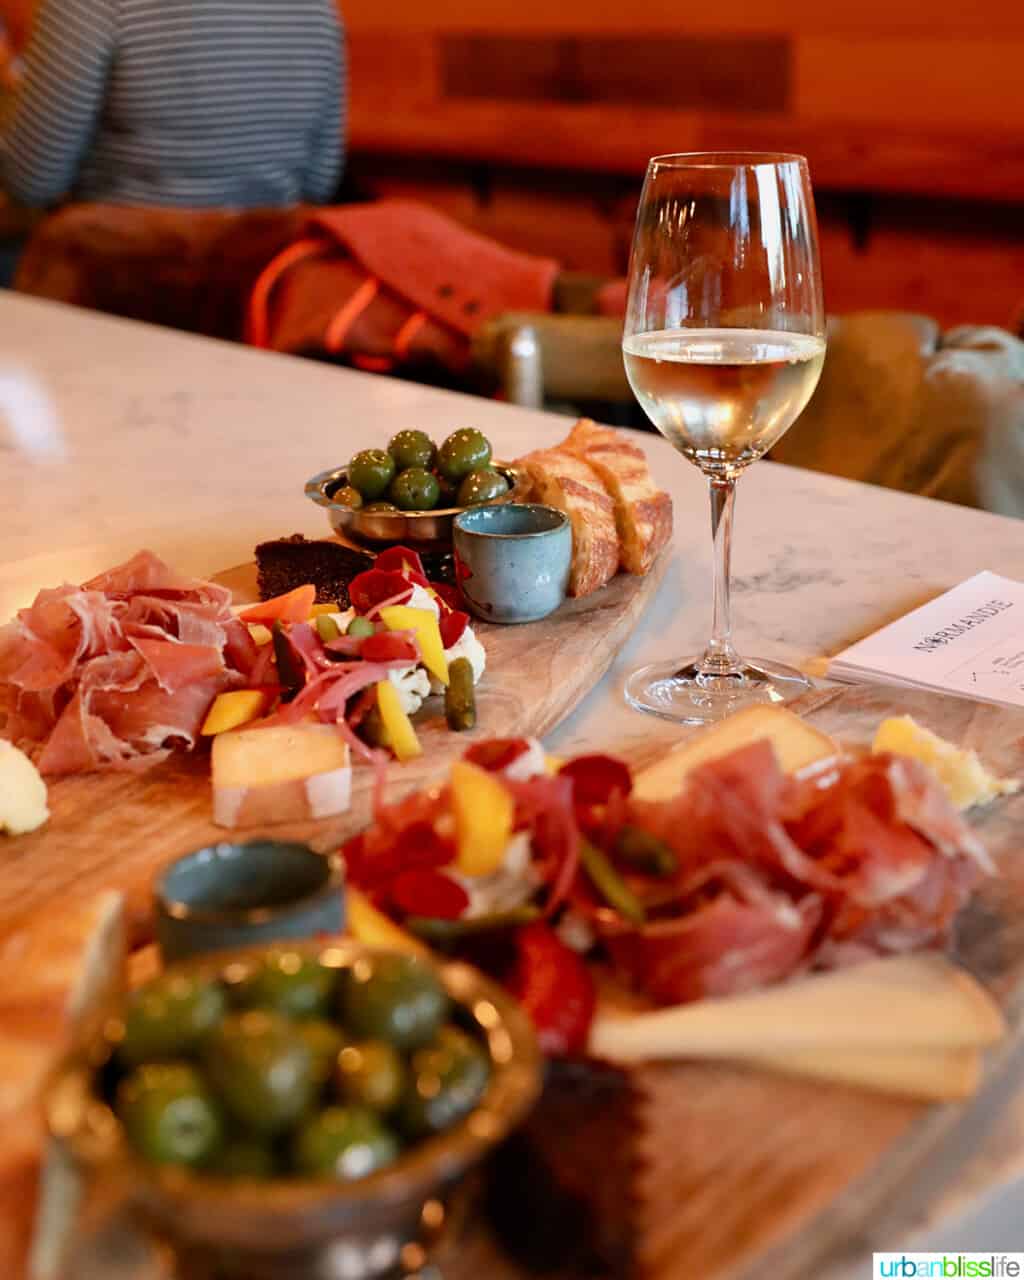 glass of white wine next to charcuterie boards  at normandie restaurant in Portland, Oregon.